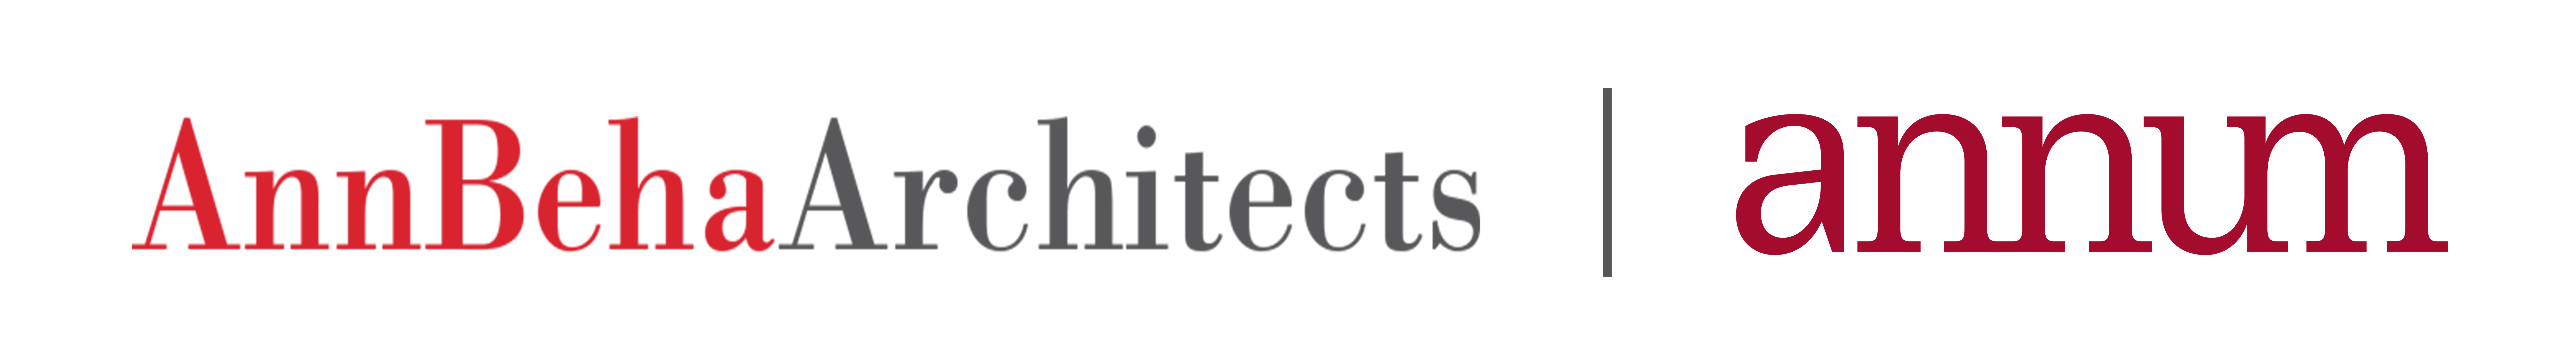 Image of Ann Beha Architects and Annum partner logo